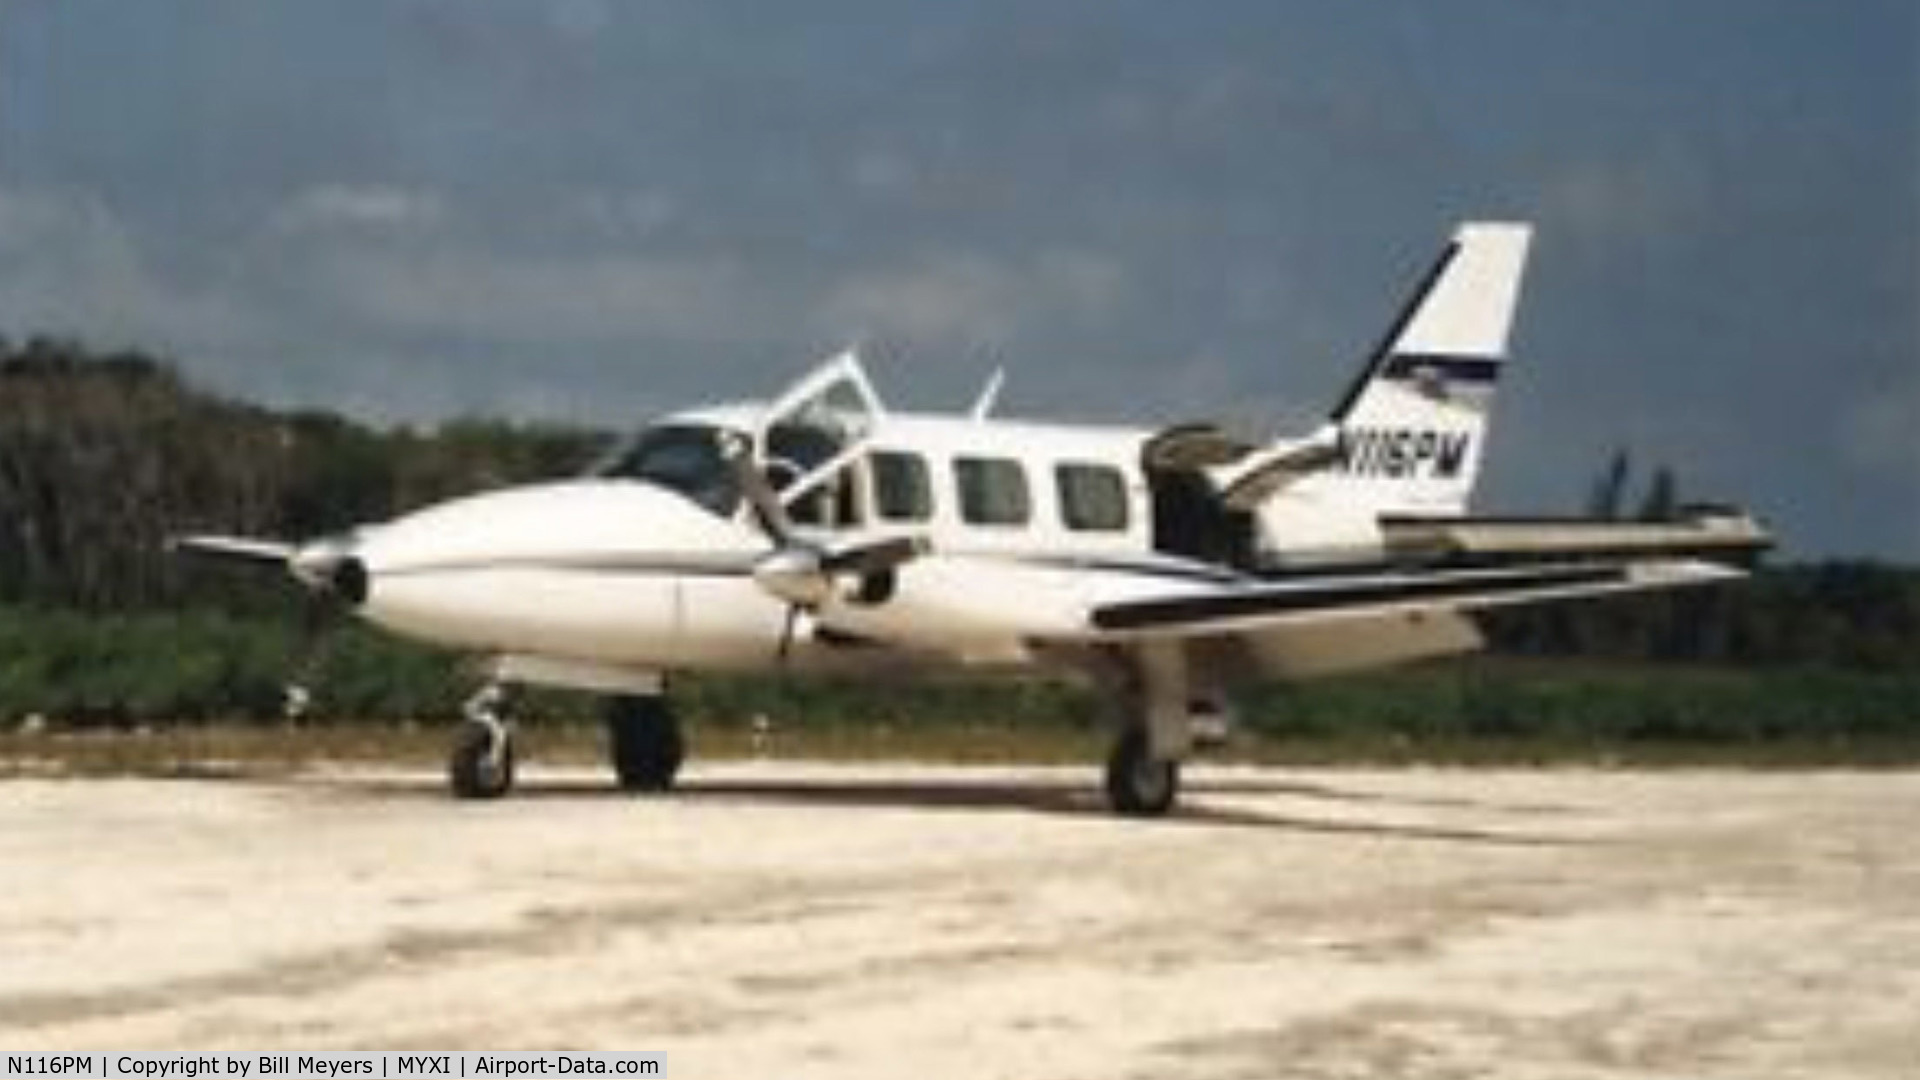 N116PM, Piper PA-31-350 Chieftain C/N 31-8052127, N116PM on the ground at Scotland Cay Bahamas circa 1994